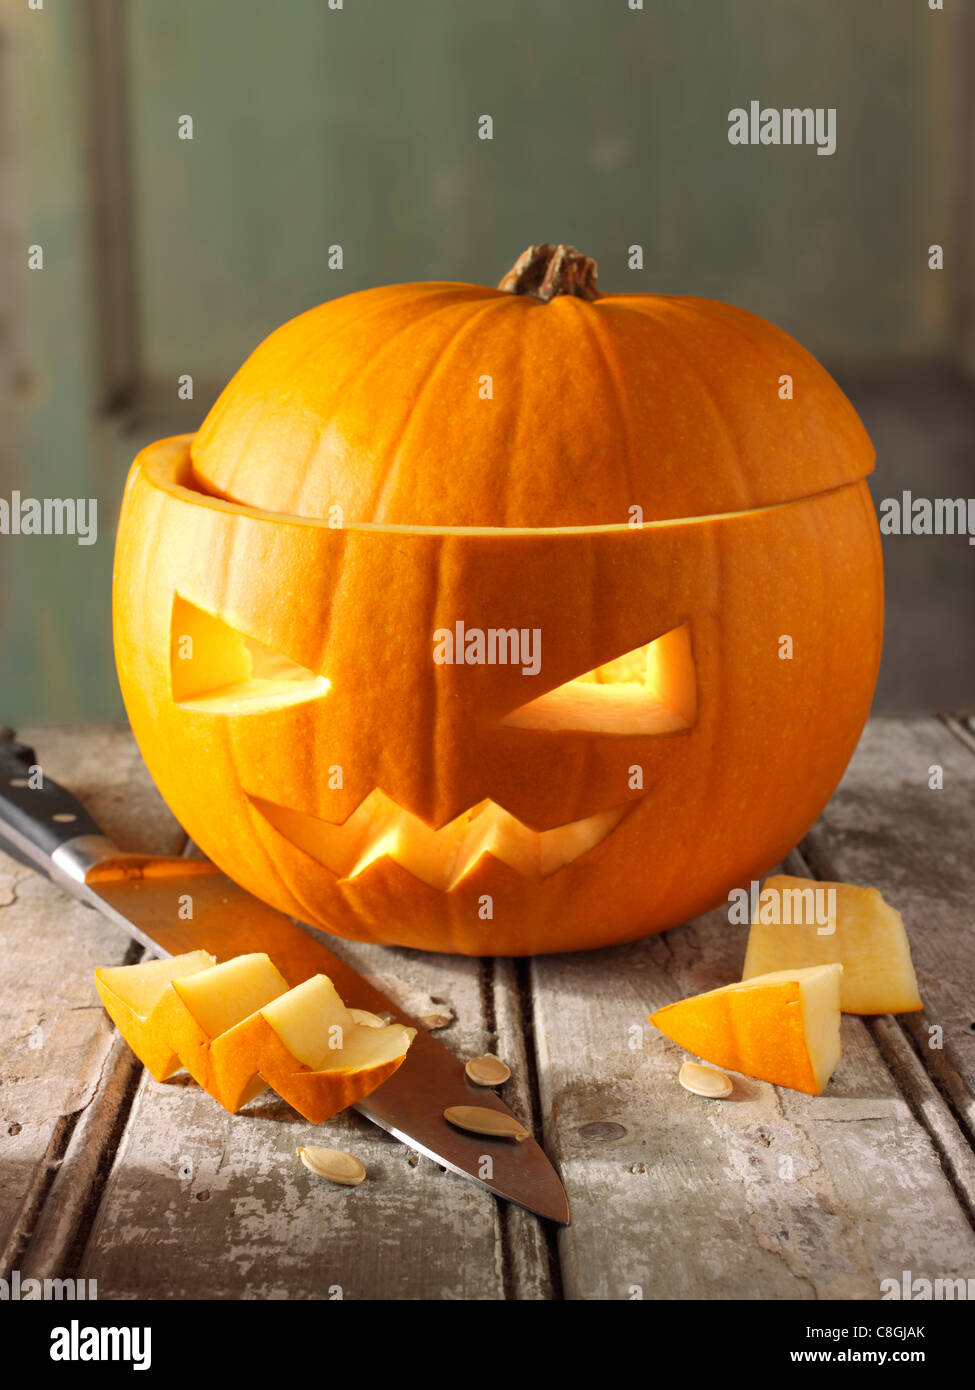 Pumpkin with a traditional Haloween carved face Stock Photo